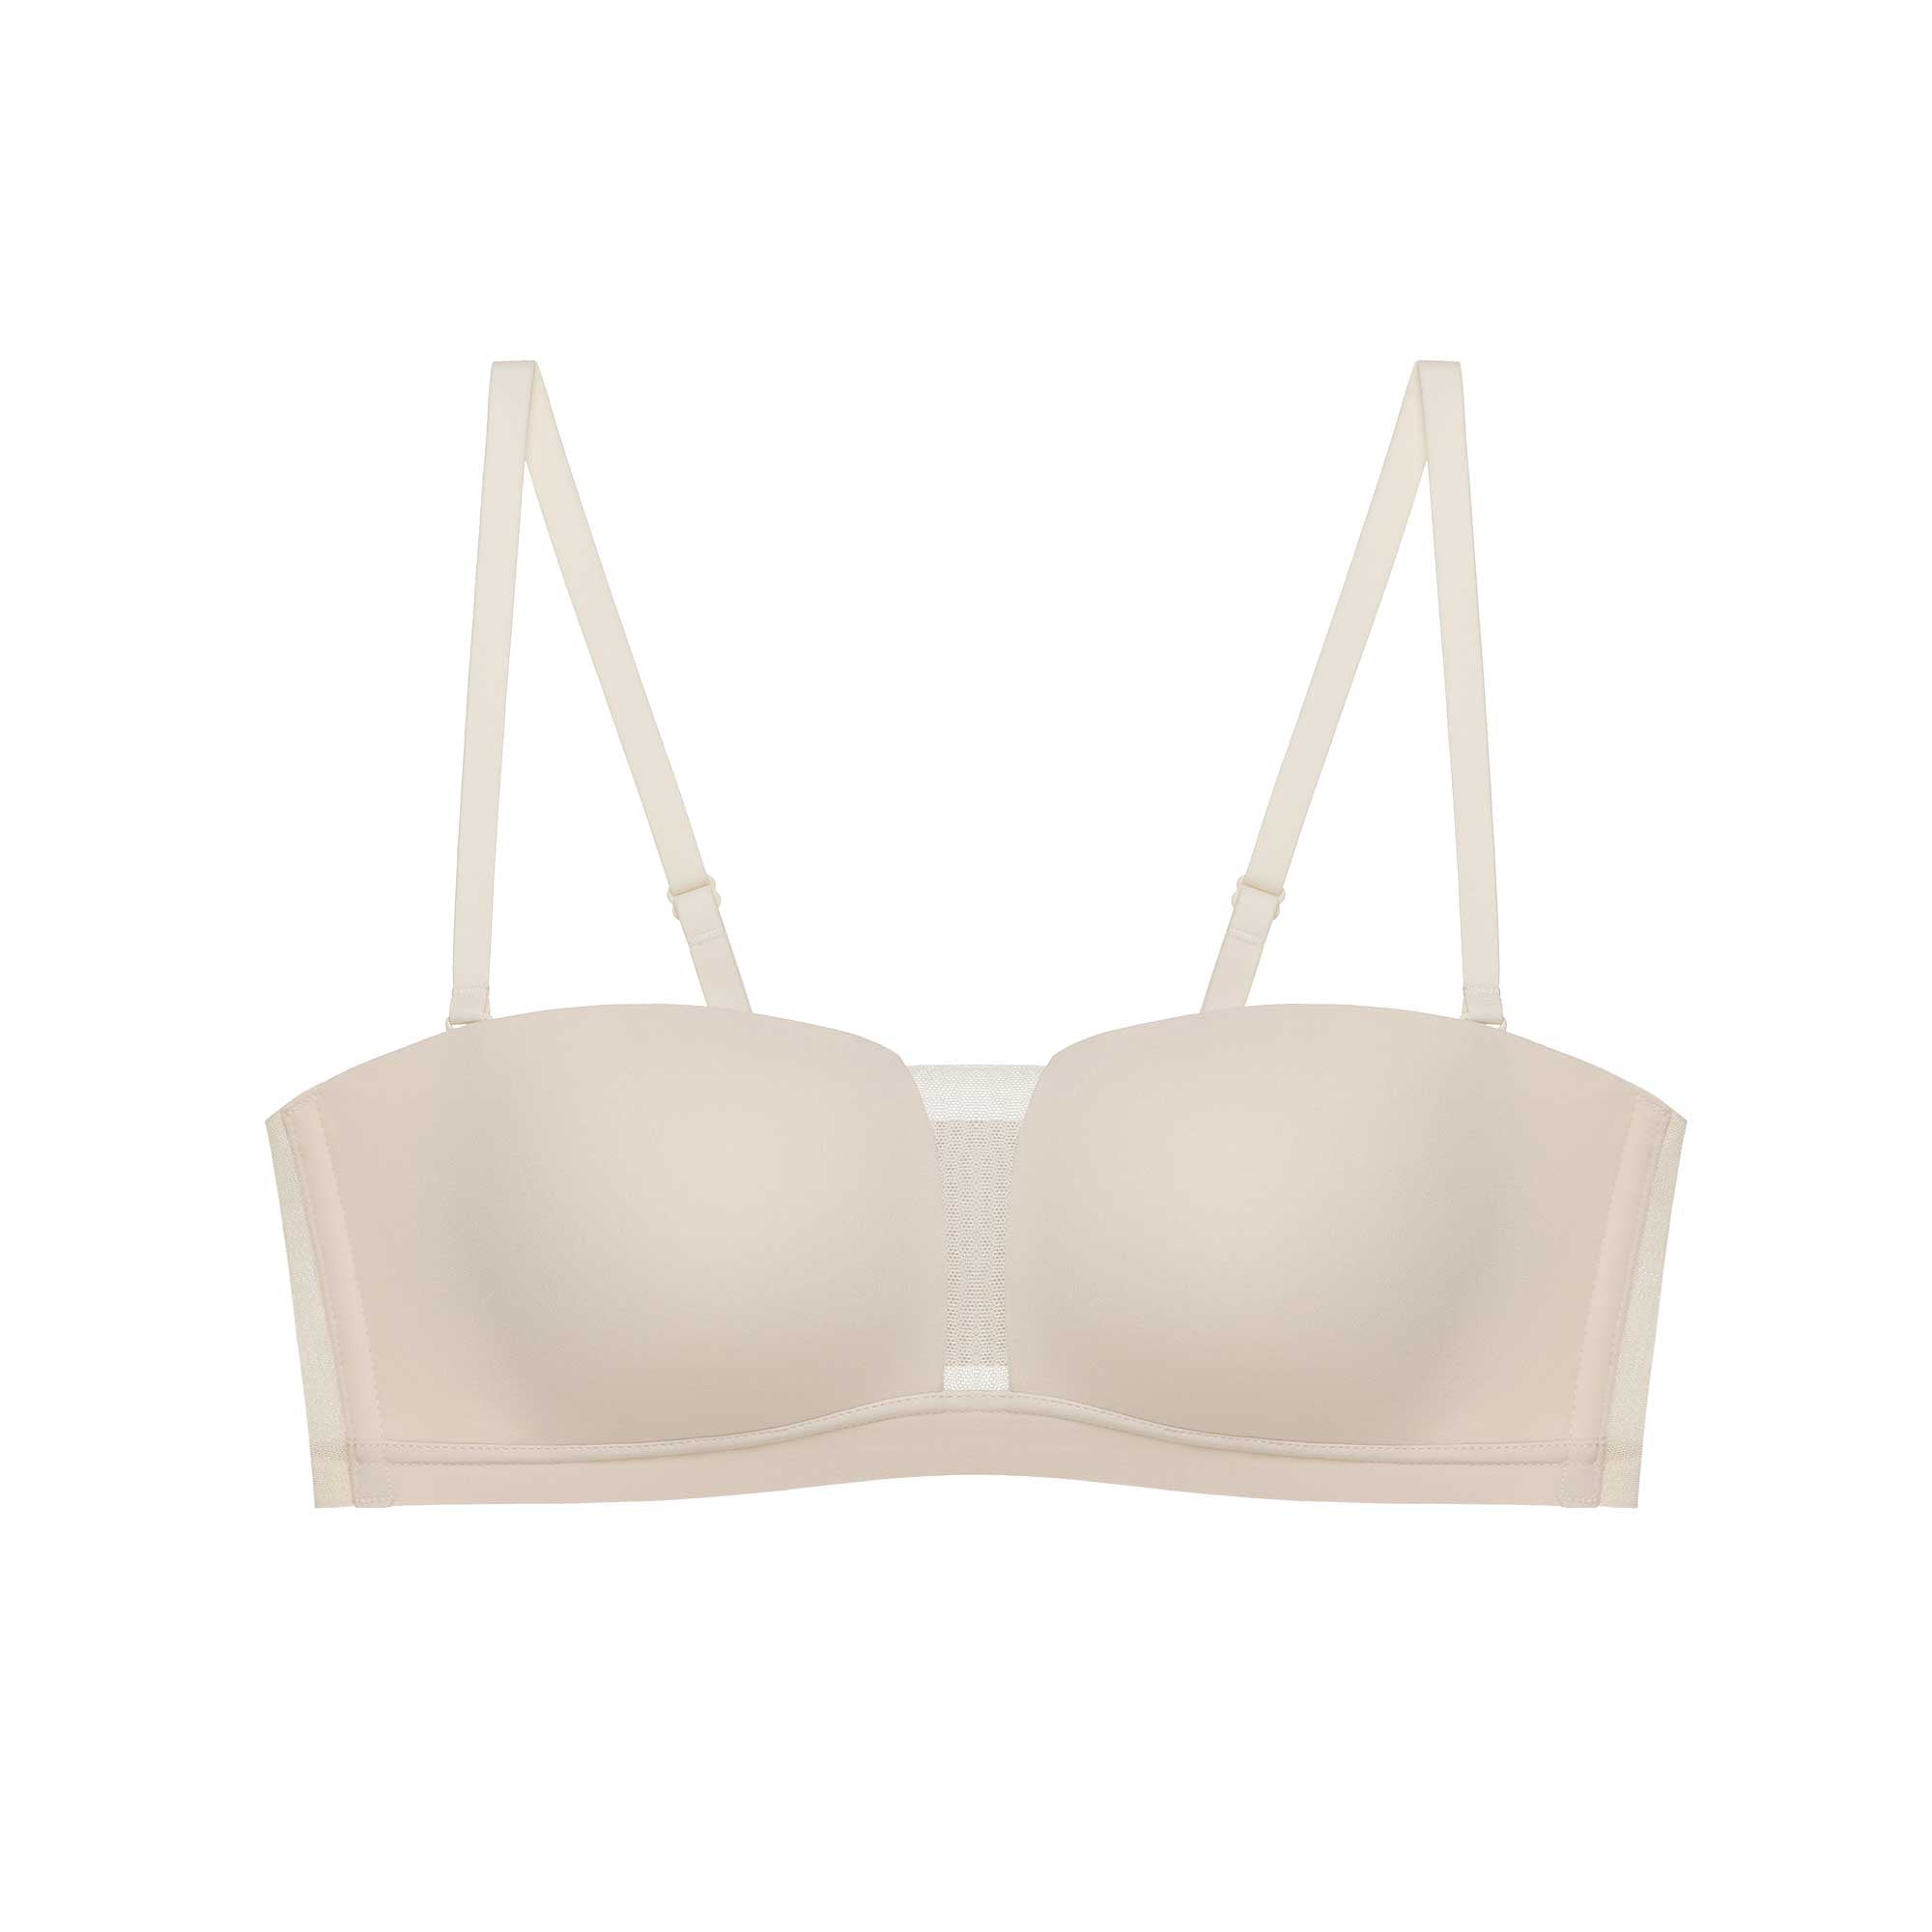 Flat lay image of a beige bandeau bra with mesh insert and removable straps